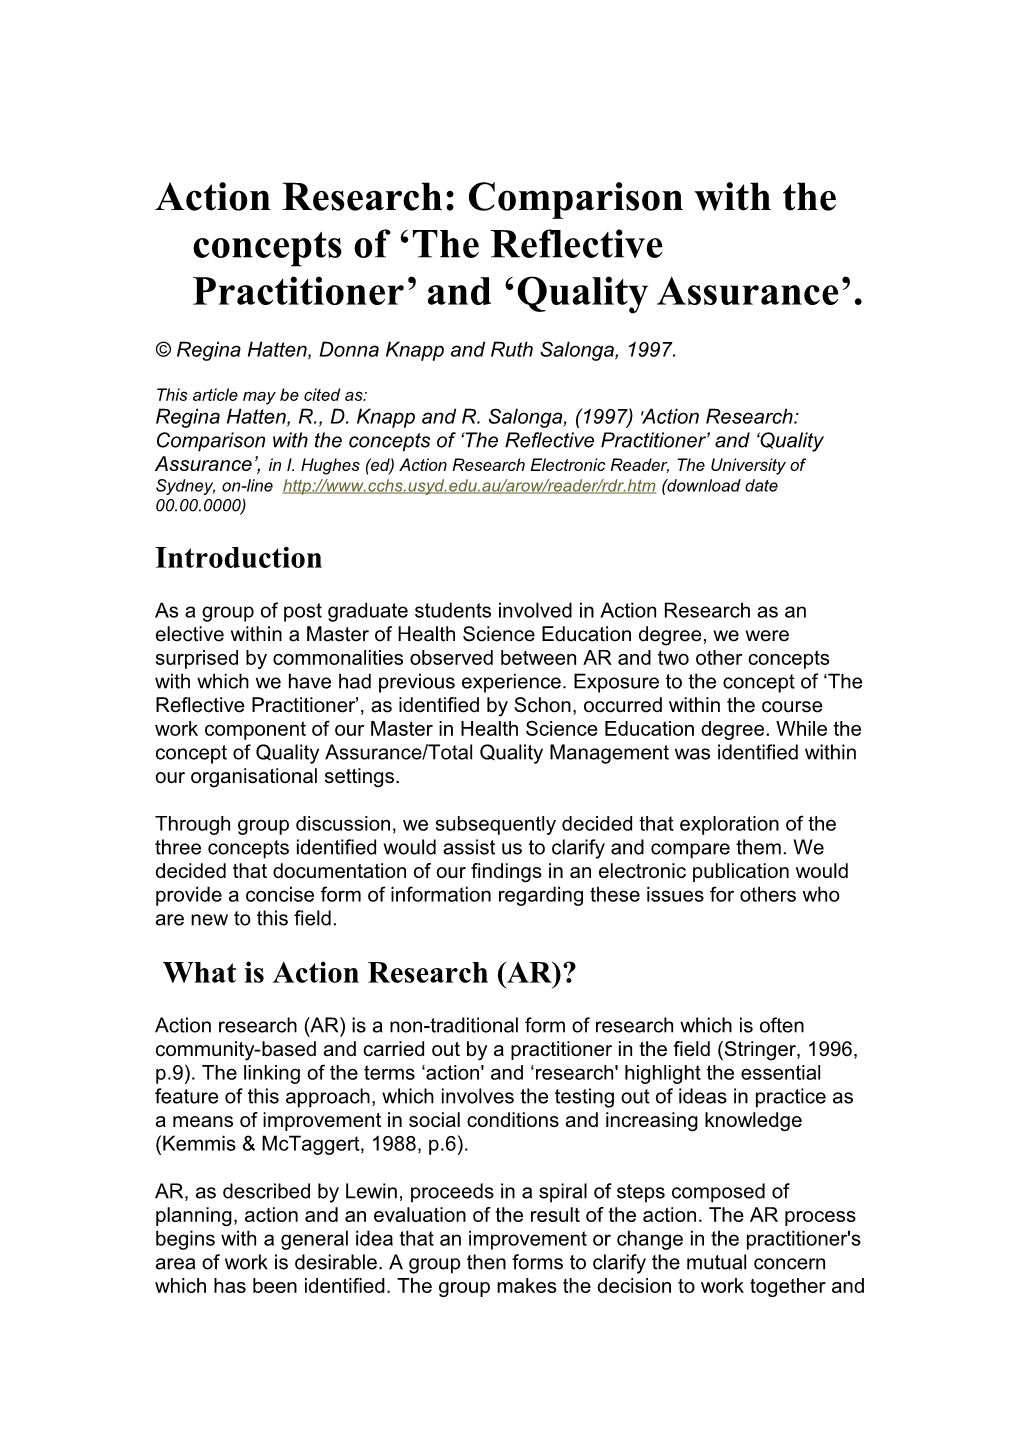 Action Research: Comparison with the Concepts of the Reflective Practitioner and Quality